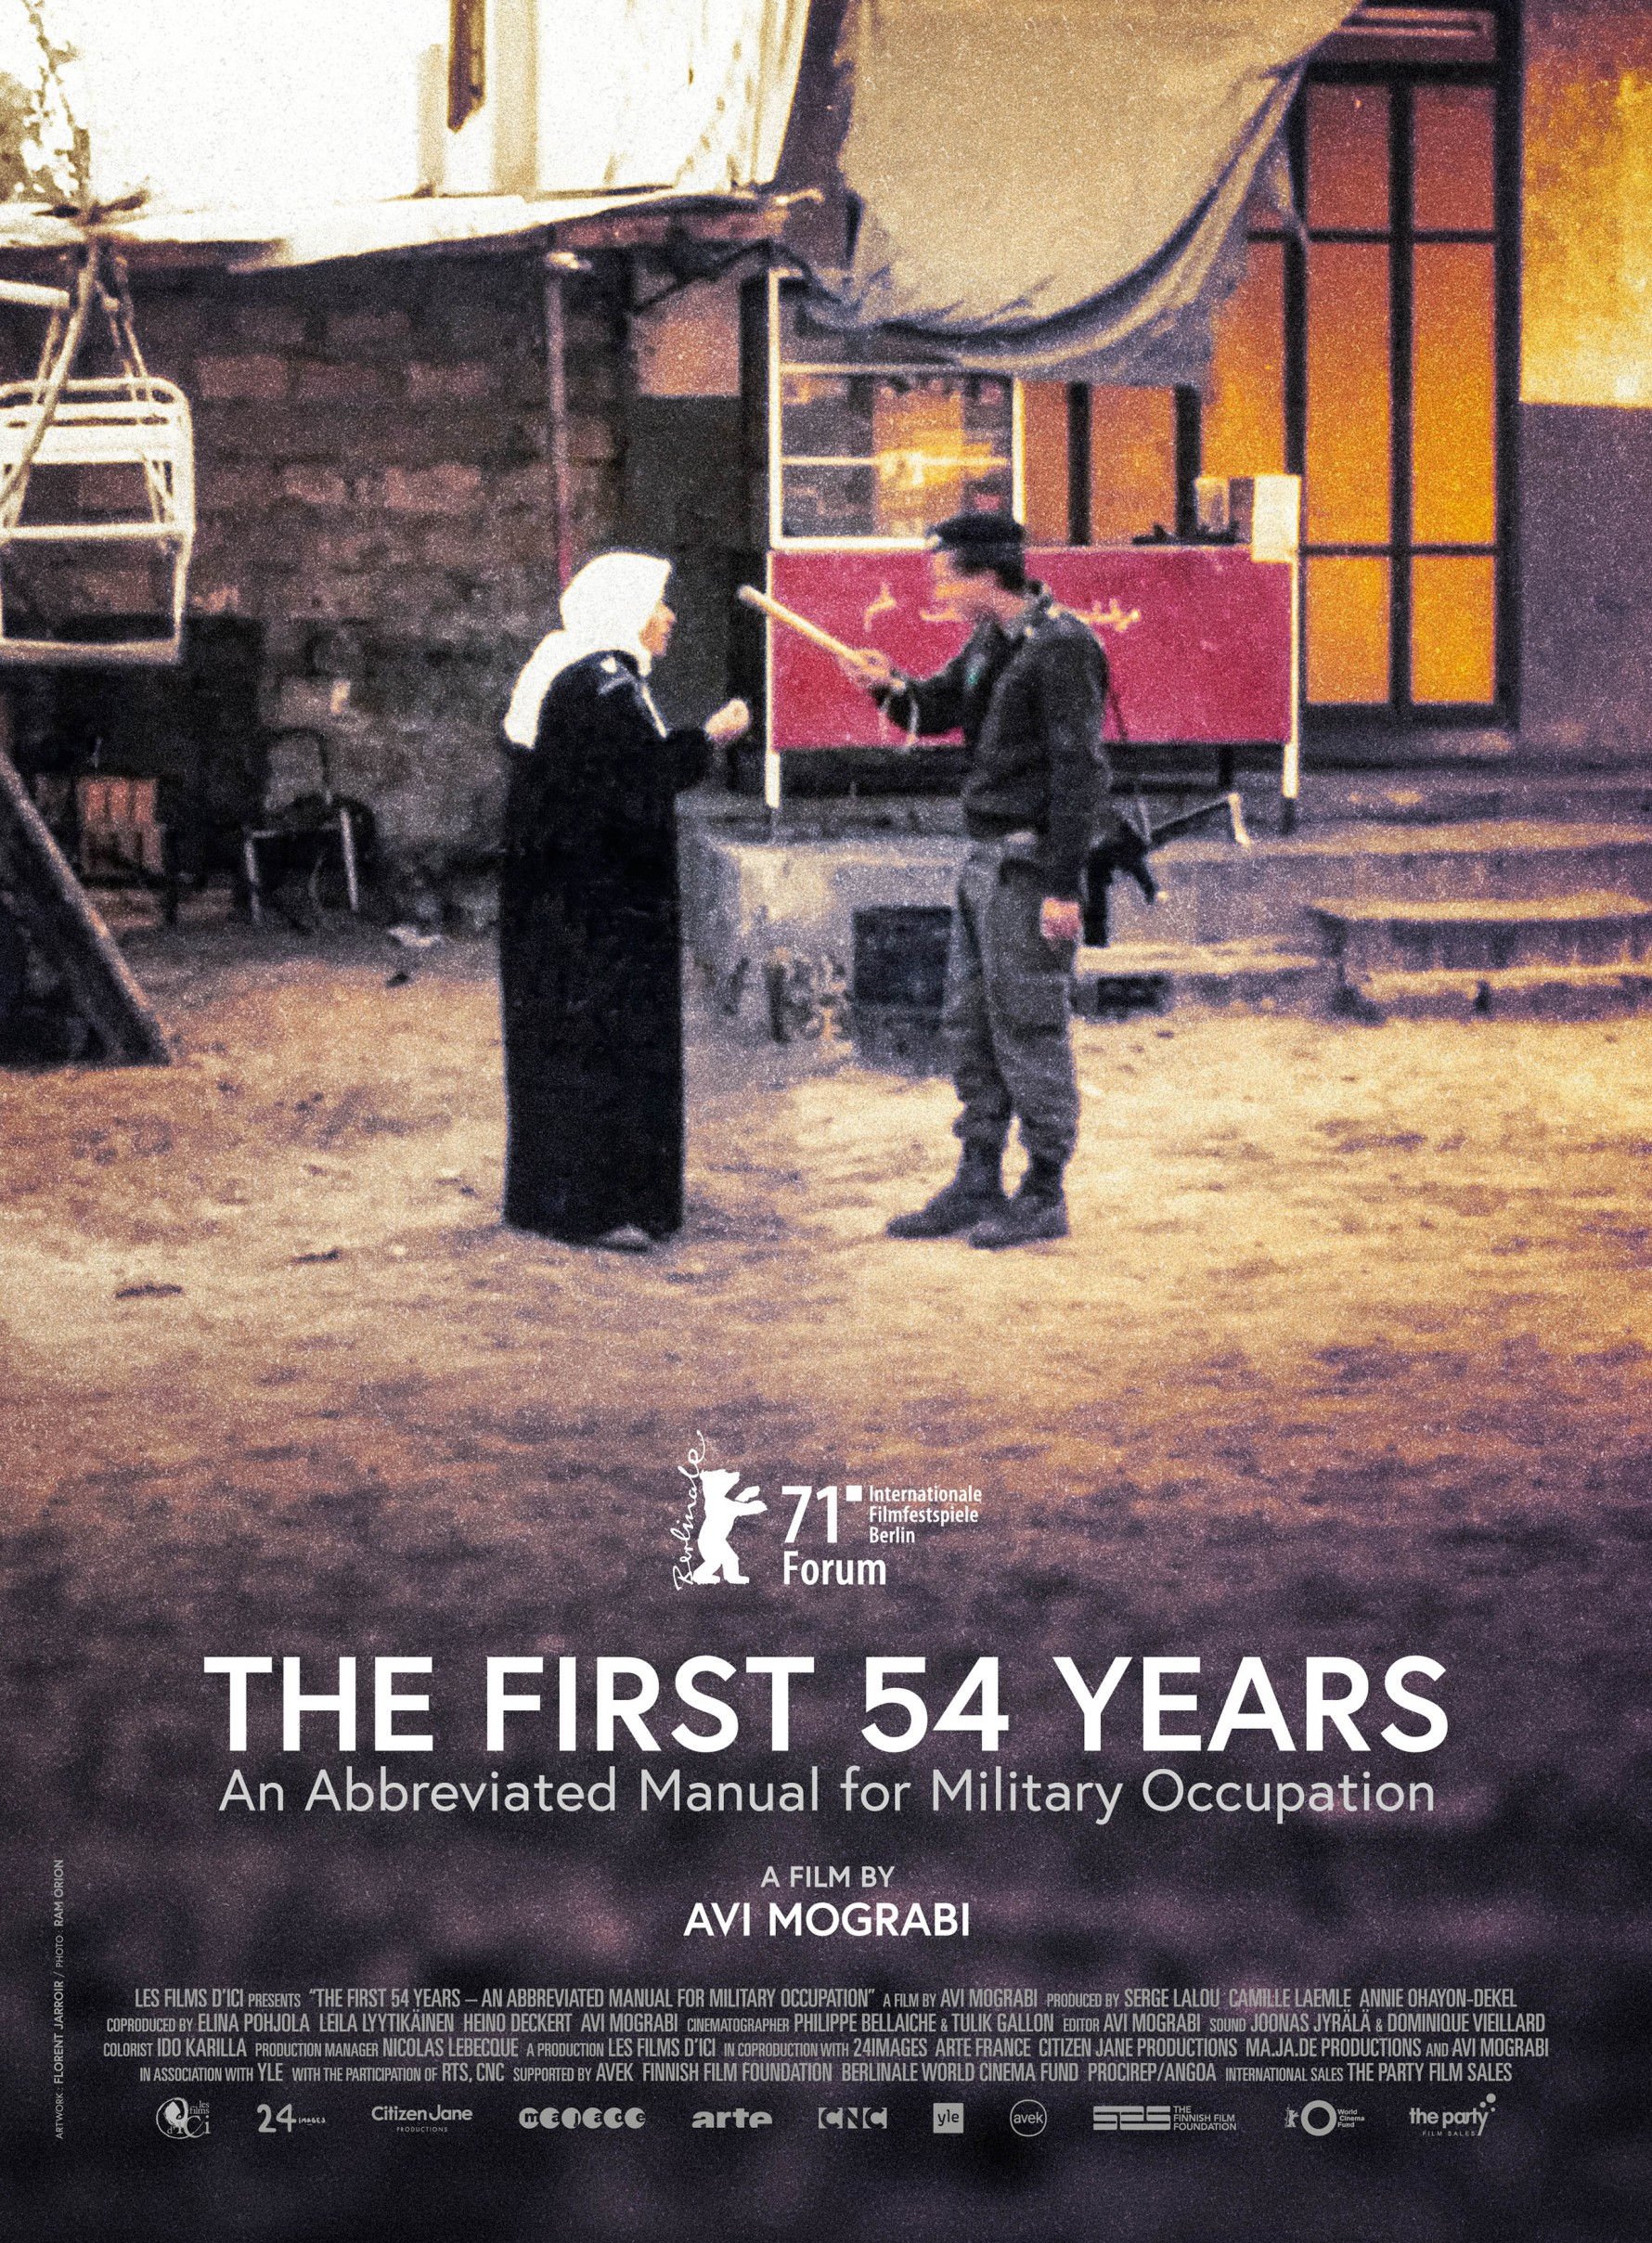 The First 54 Years: An Abbreviated Manual for Military Occupation, Film Screening and Q&amp;A